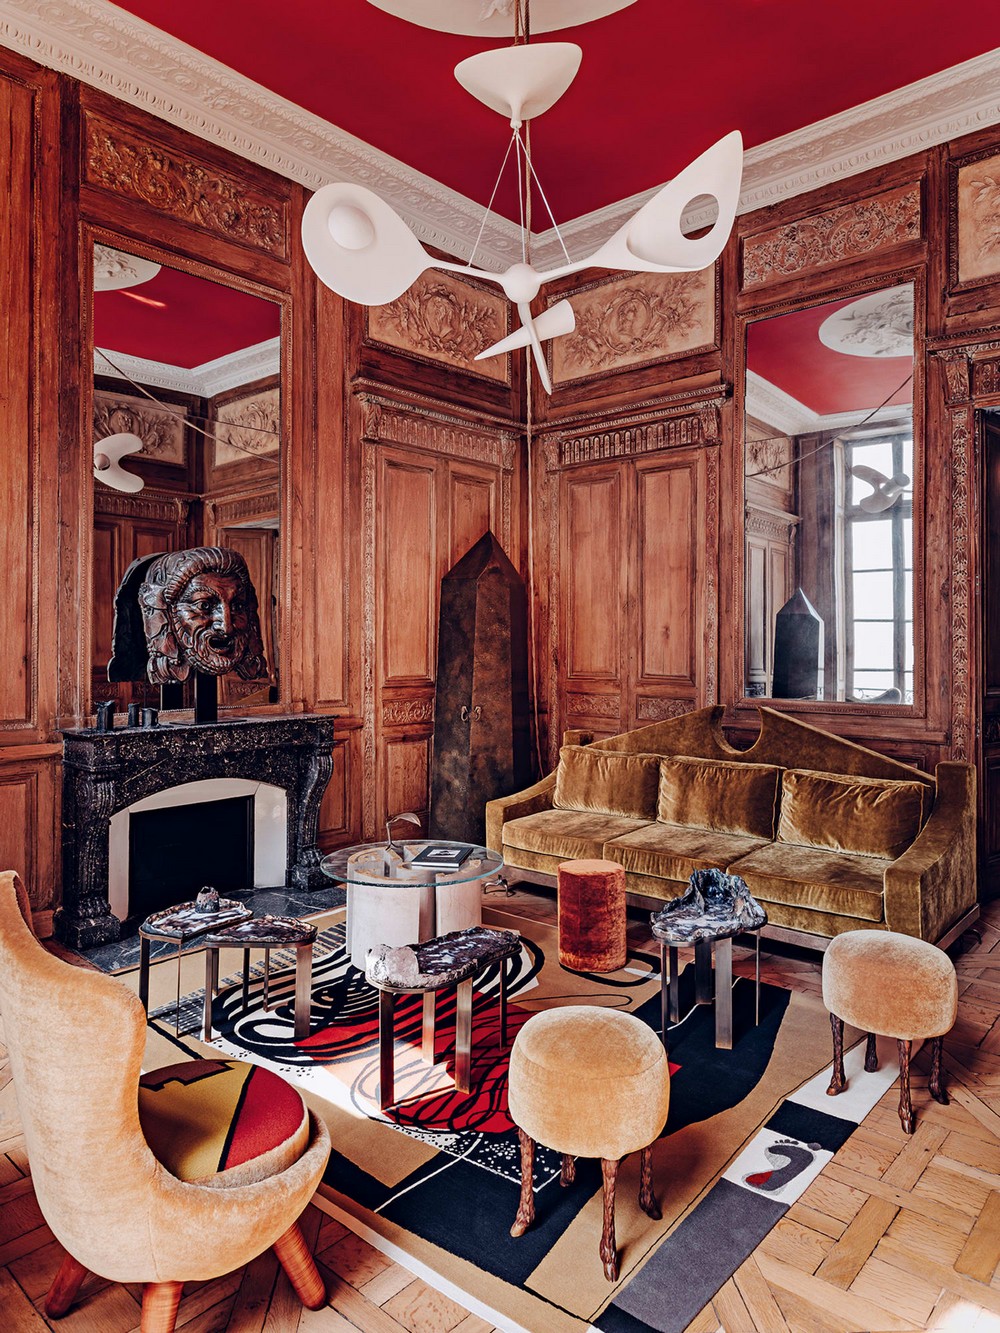 The Surreal Interior Design World of Vicent Darré